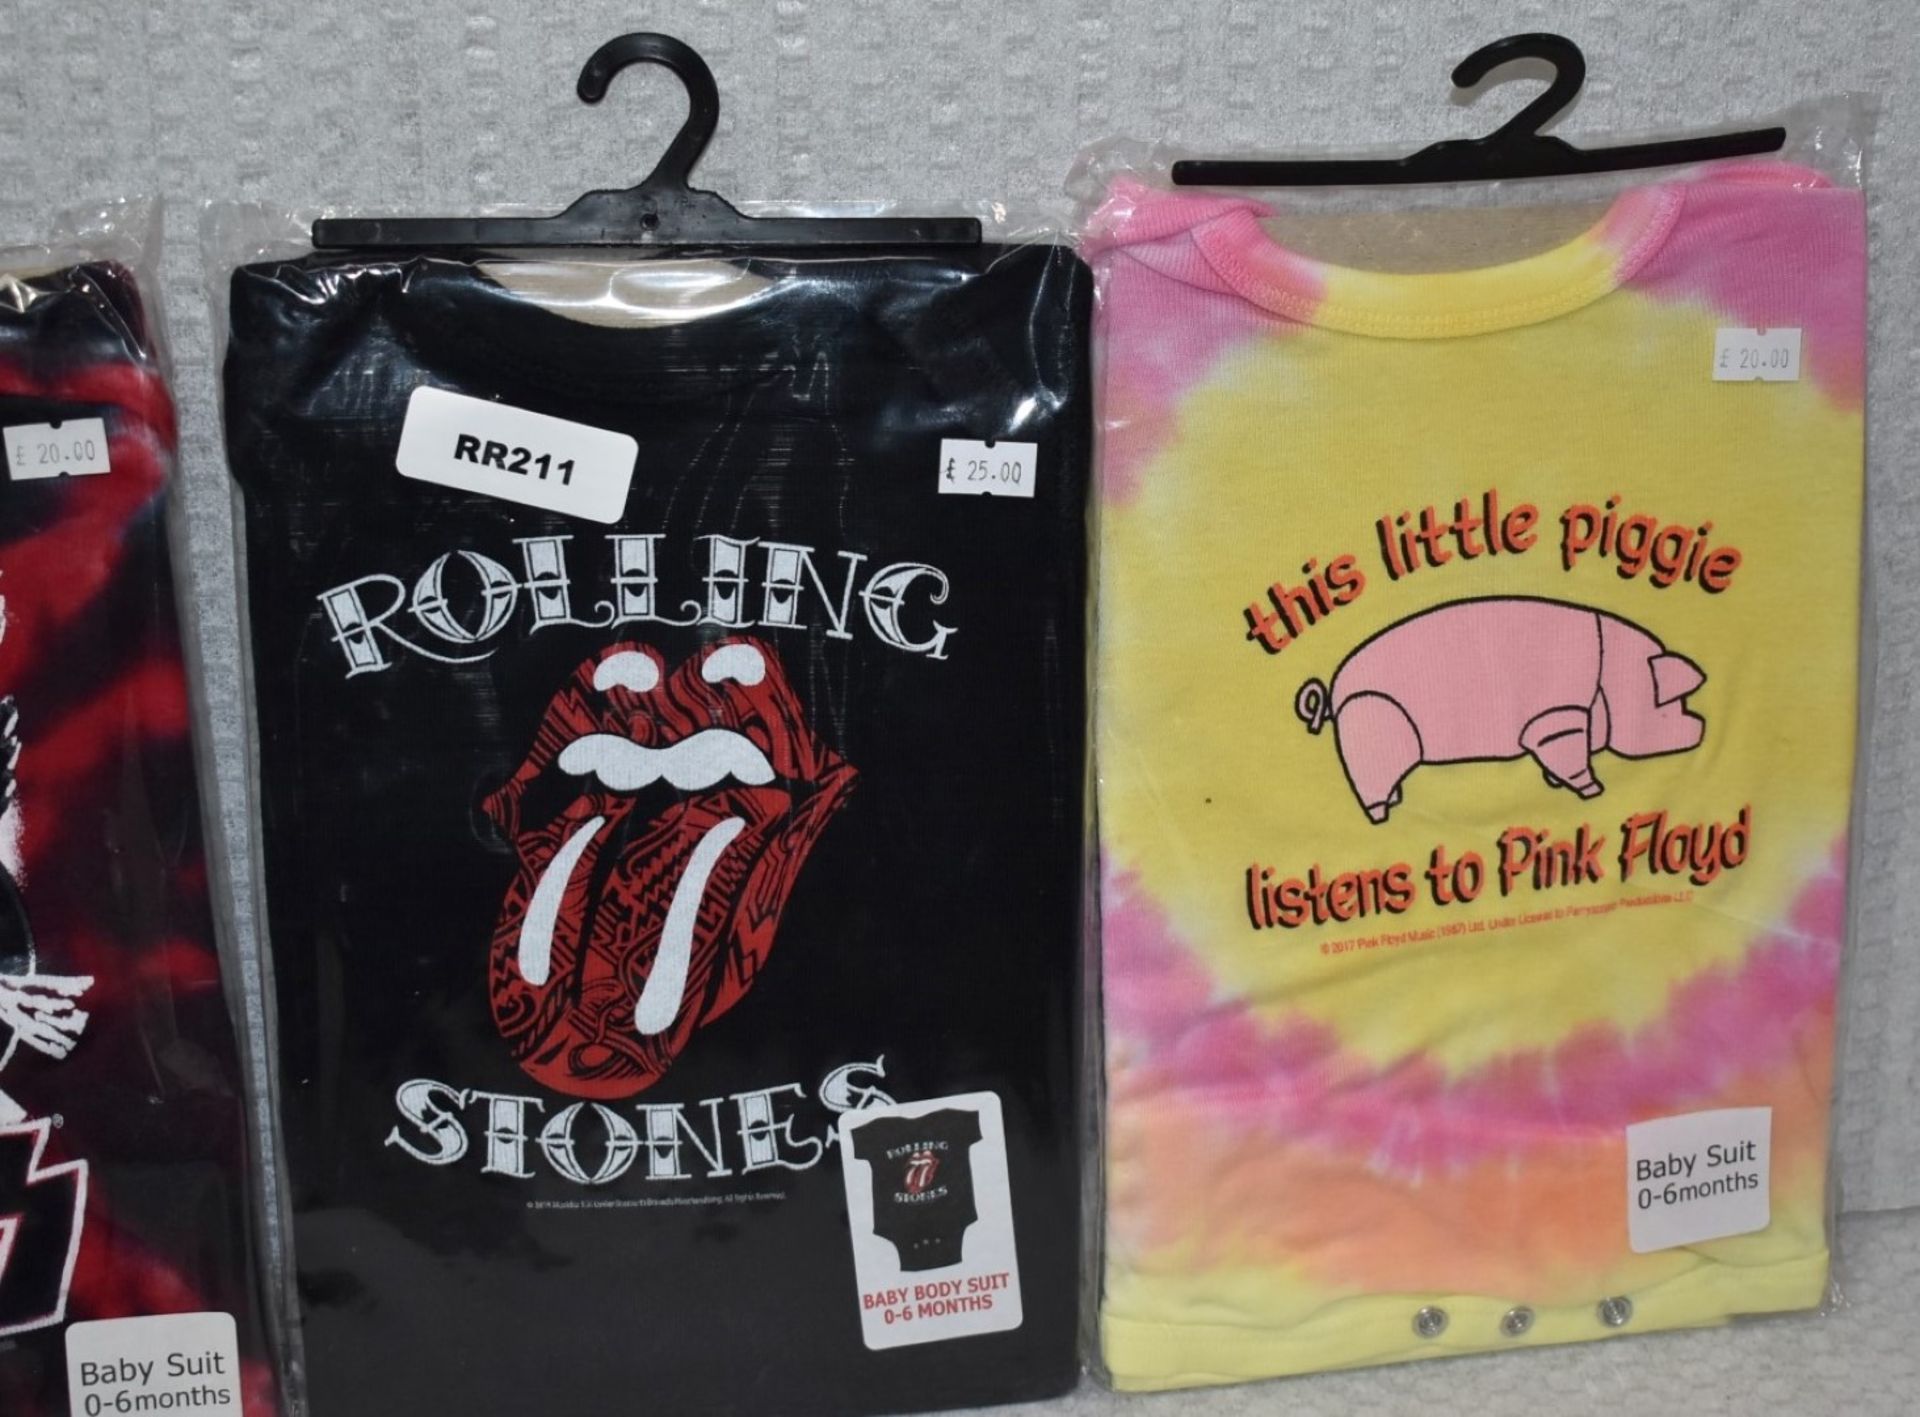 4 x Rock n Roll Themed Baby Suits - For Ages 0-6 Months - Features Pink Floyd, Kiss and Rolling - Image 3 of 4